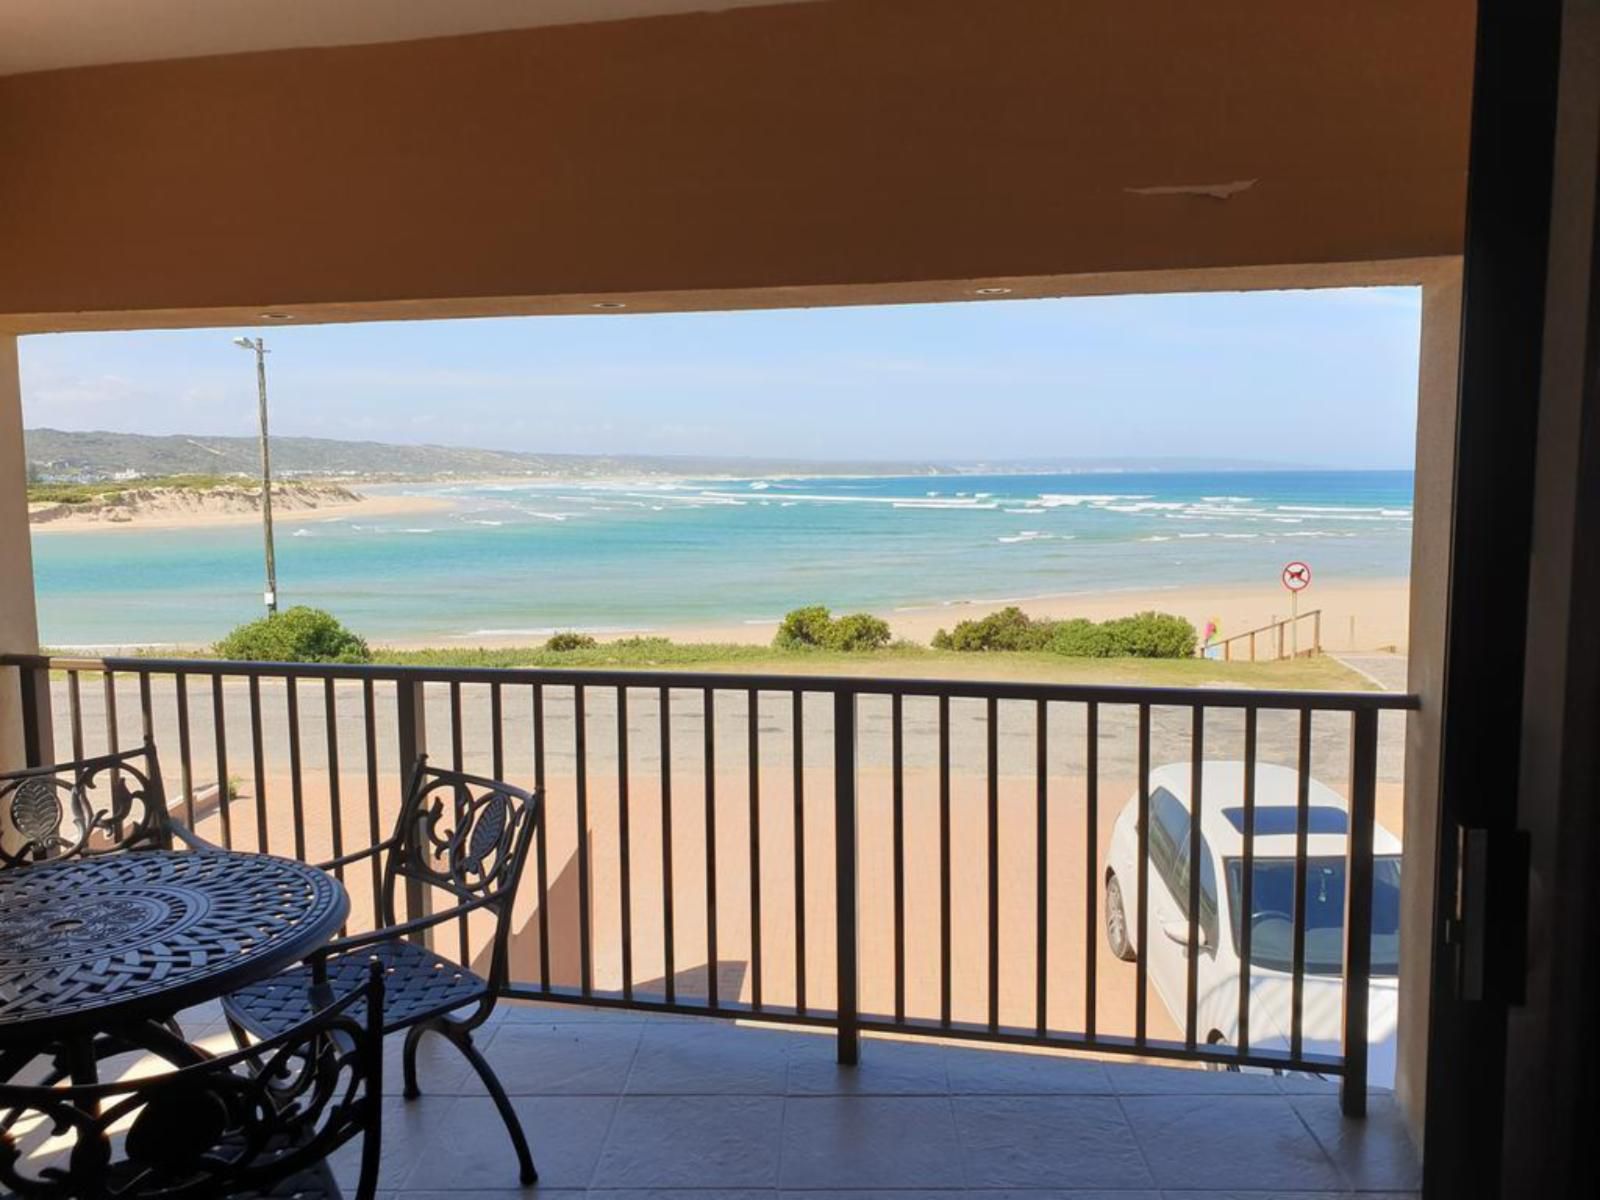 See Struis Holiday Flats Stilbaai Western Cape South Africa Complementary Colors, Beach, Nature, Sand, Framing